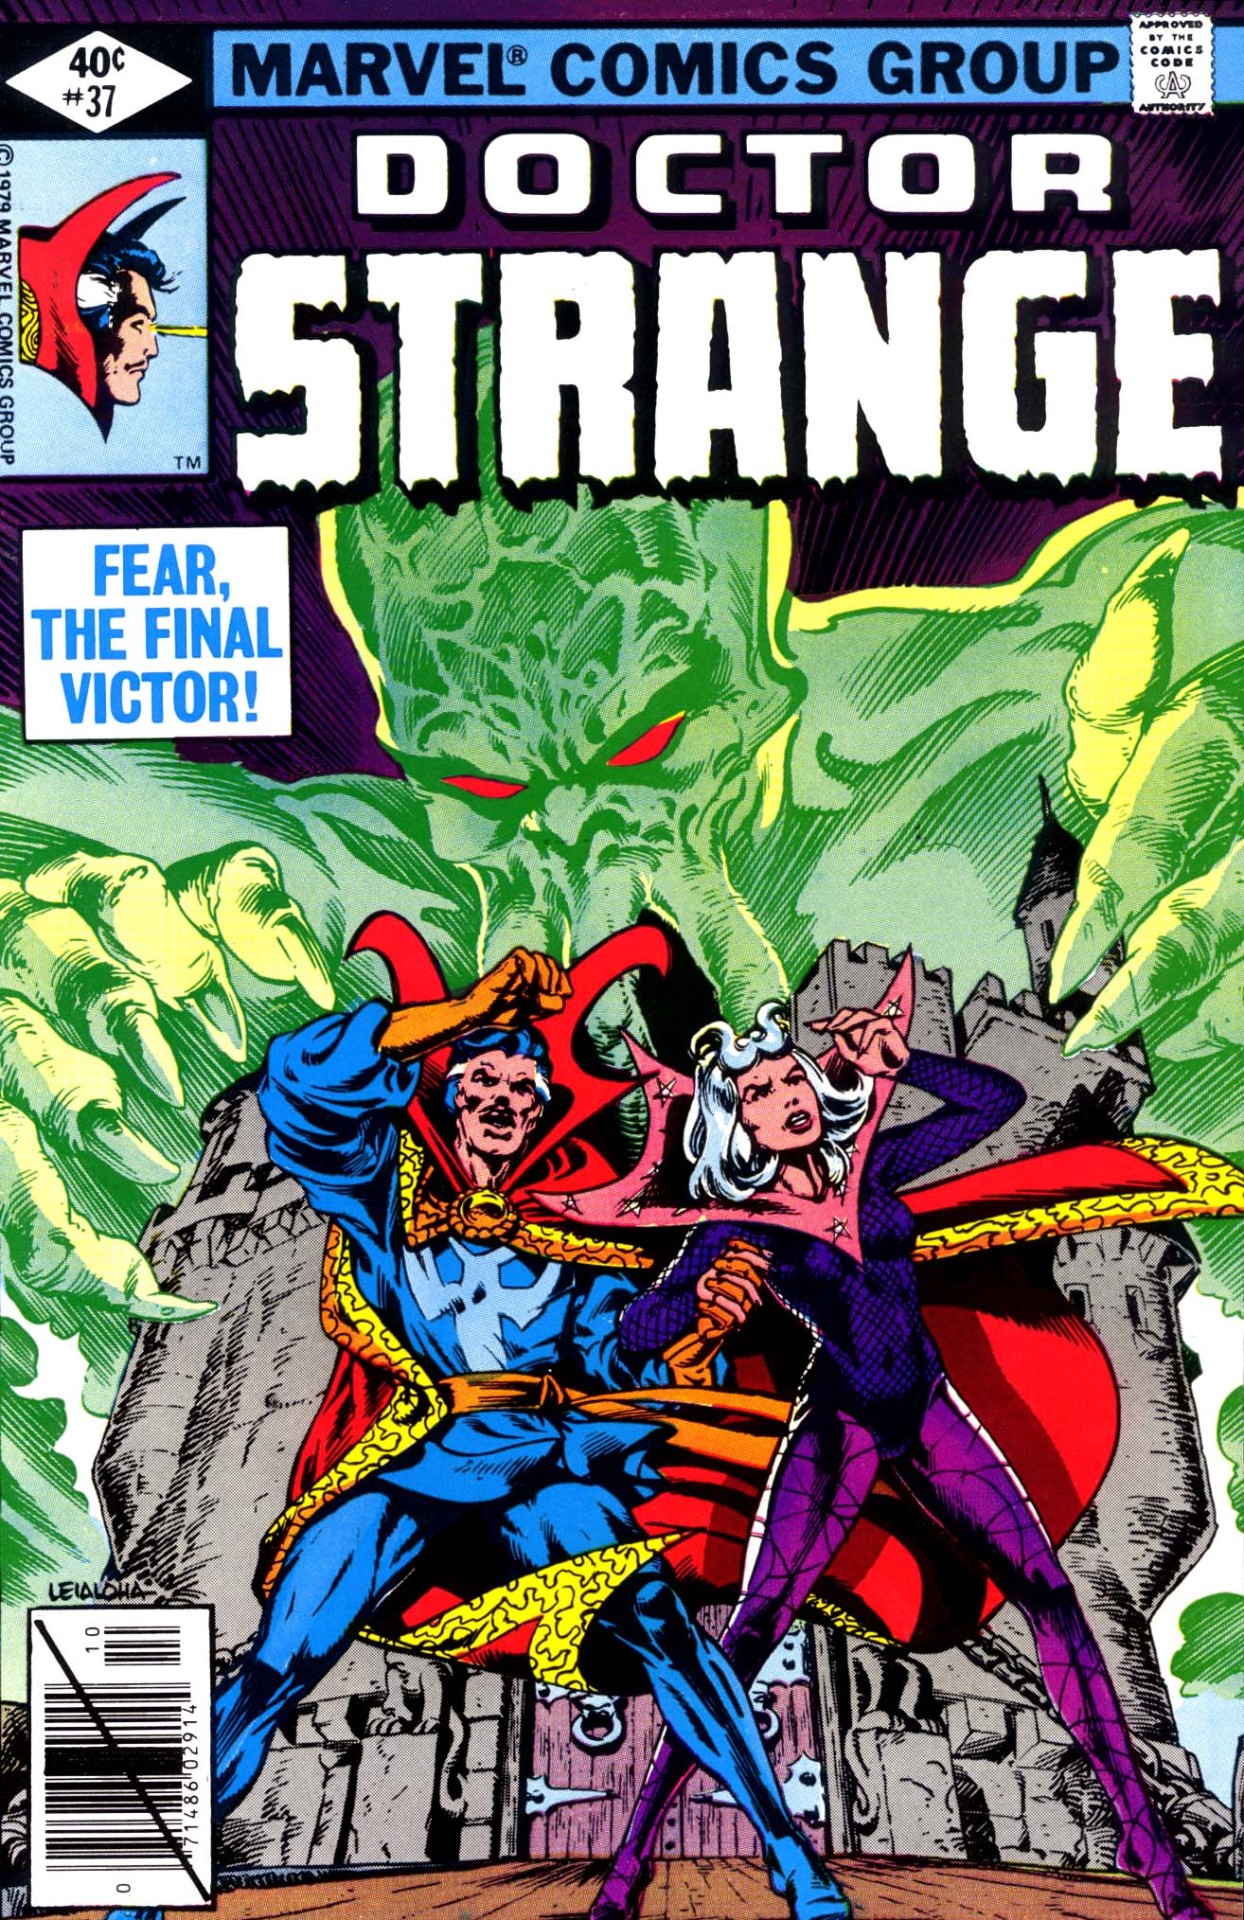 Clea Doctor Strange Porn - Heroes Get Made â€” Cheer Up Post #4691 - Clea & Stephen Edition